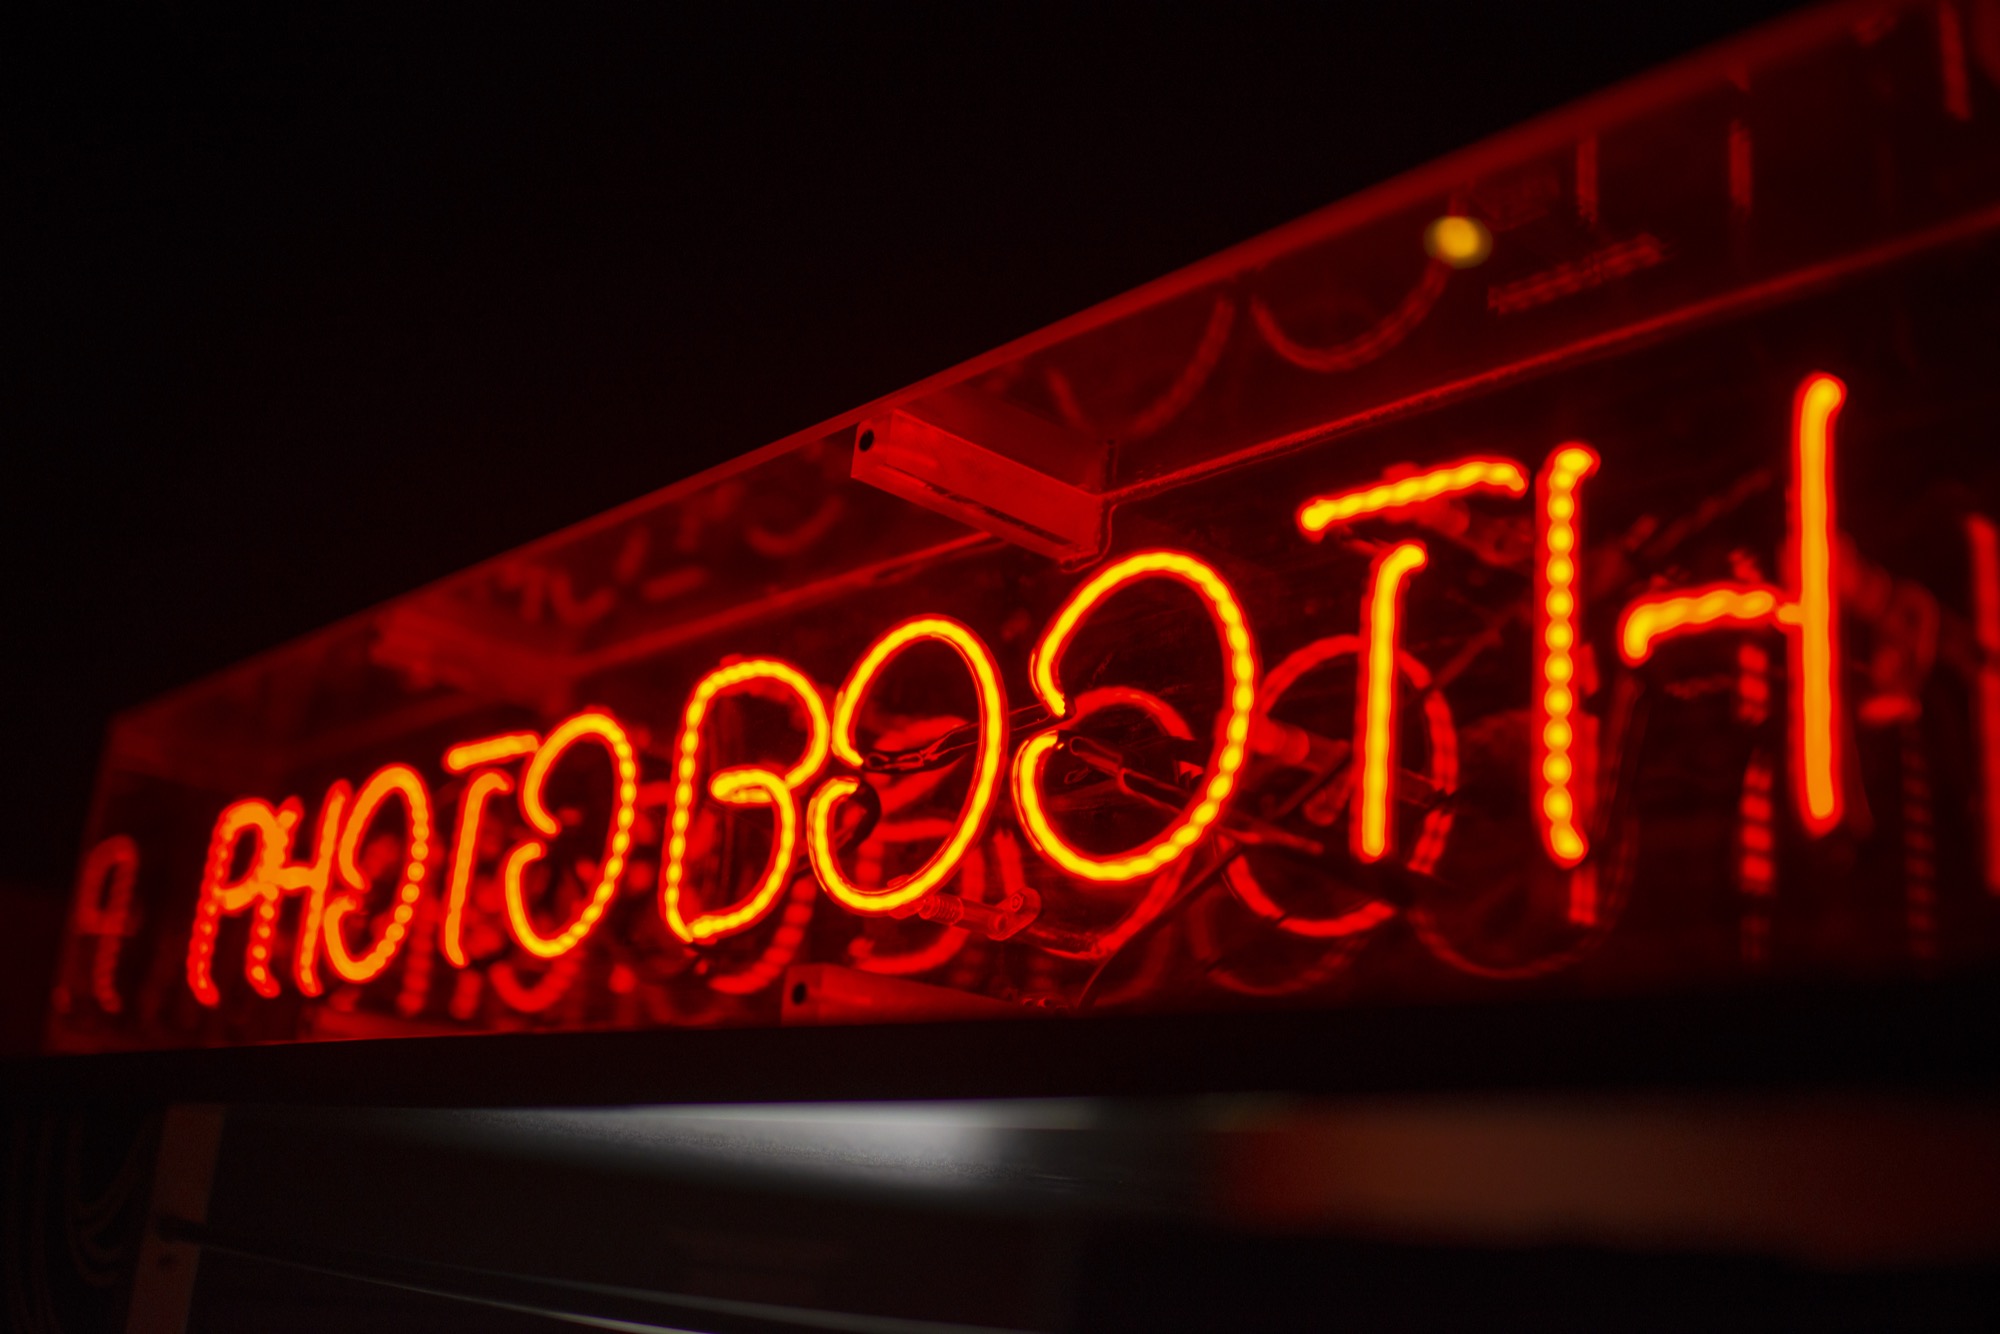 Box Photo Booth neon sign